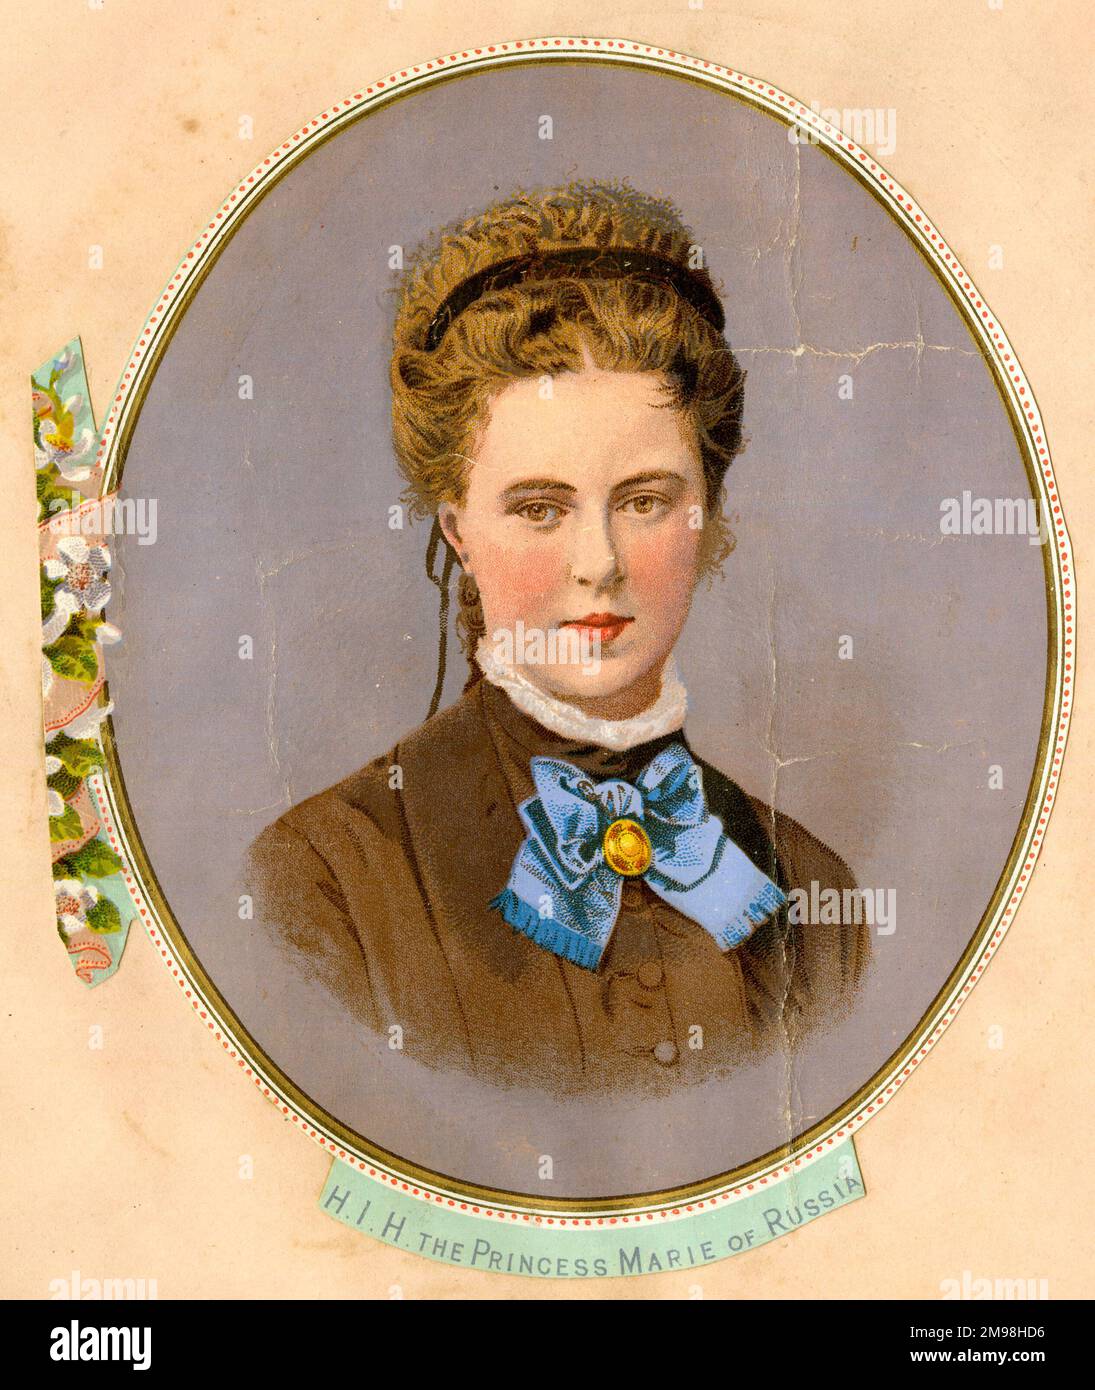 Princess Marie of Russia (Grand Duchess Maria Alexandrovna of Russia, 1853-1920), at the time of her marriage to the Duke of Edinburgh (Alfred, Duke of Saxe-Coburg and Gotha), second son of Queen Victoria. Stock Photo